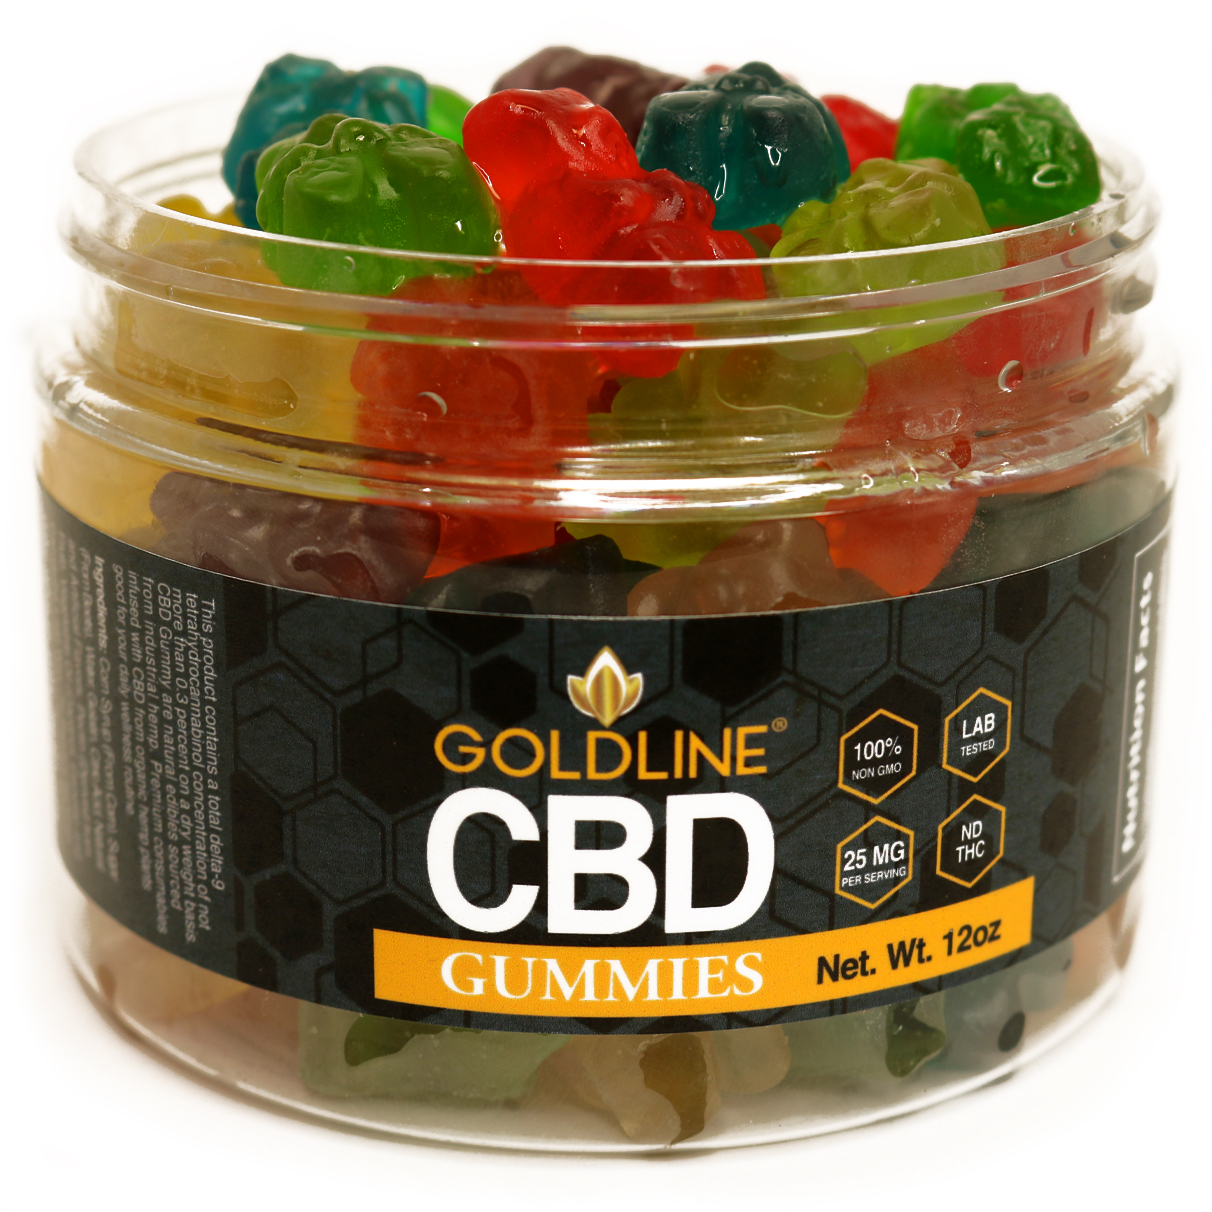 Sugar-Coated Serenity: CBD Gummies for Anxiety and Stress